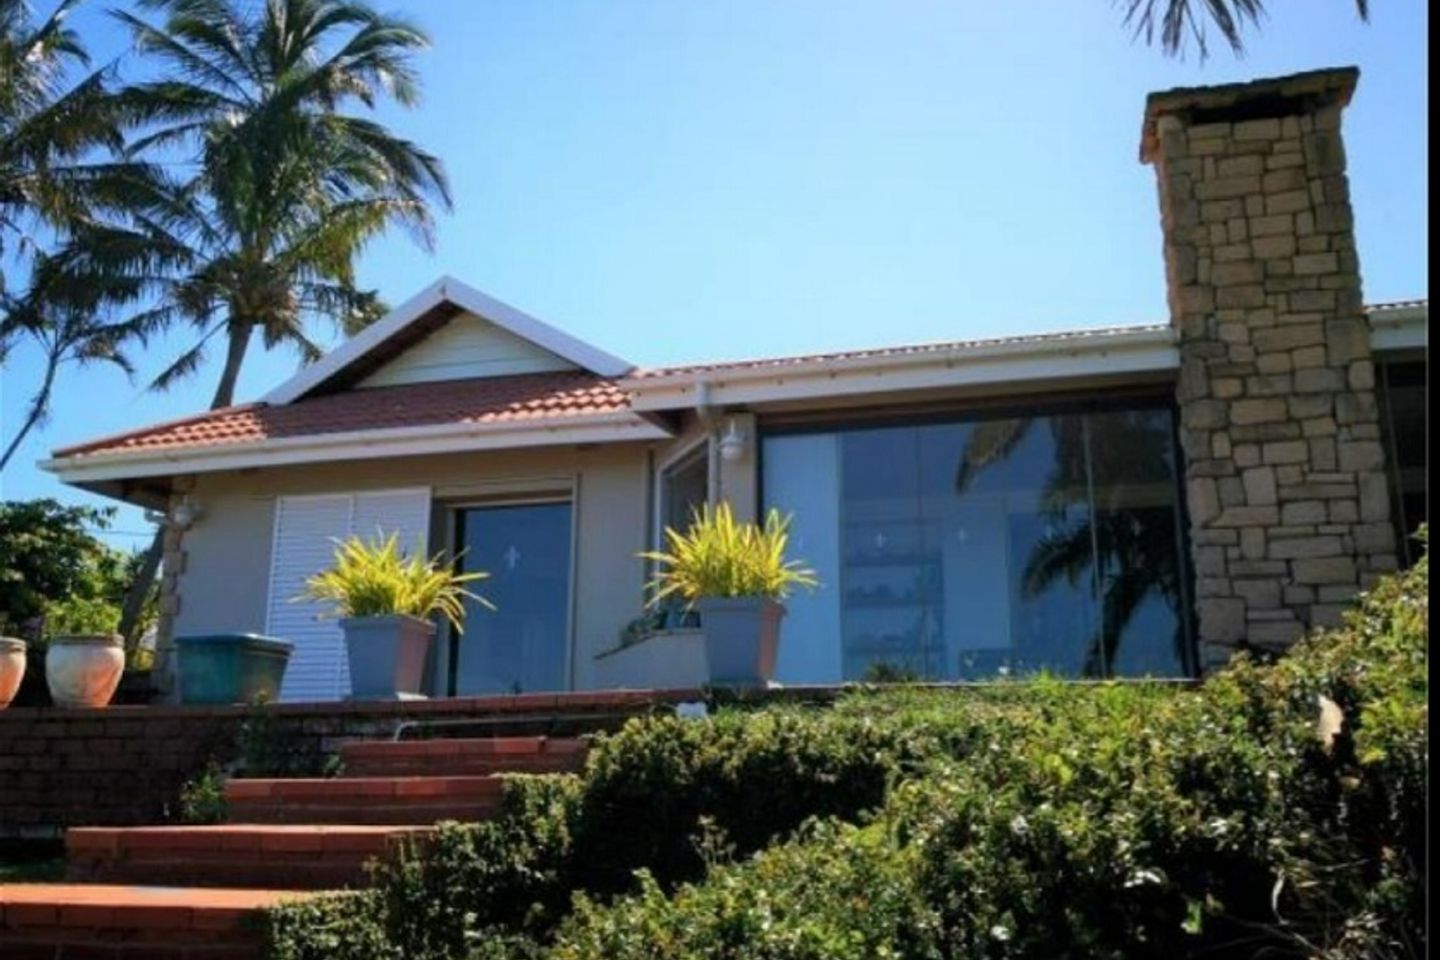 Stunning 3 Bedroom Villa For Sale In Ramsgate South Africa, Durban, KwaZulu Natal, South Africa